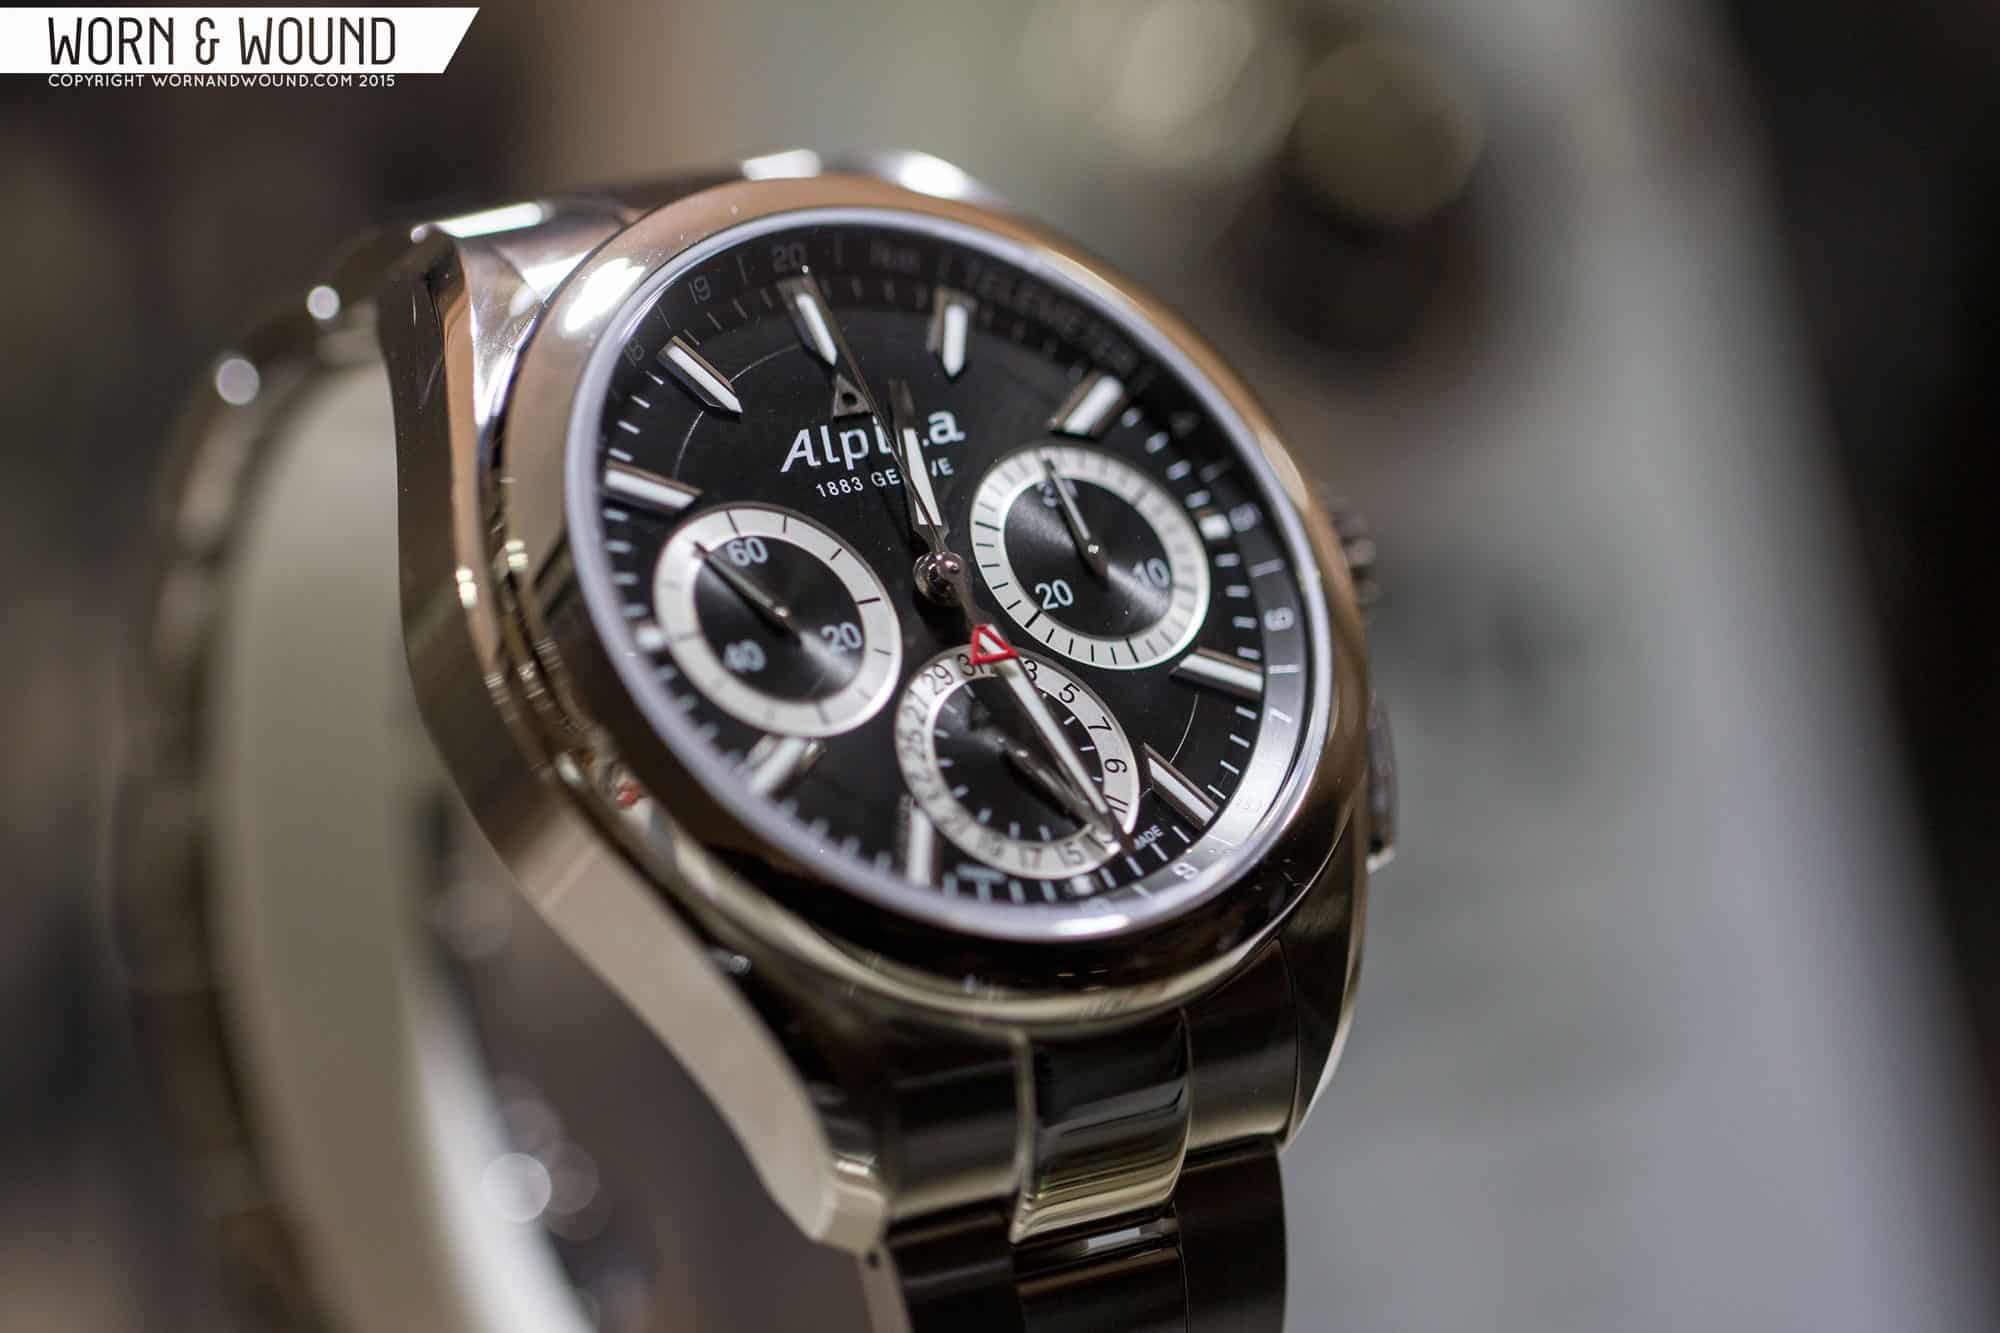 Alpina Introduces the Alpiner 4 Flyback Chronograph - Worn & Wound